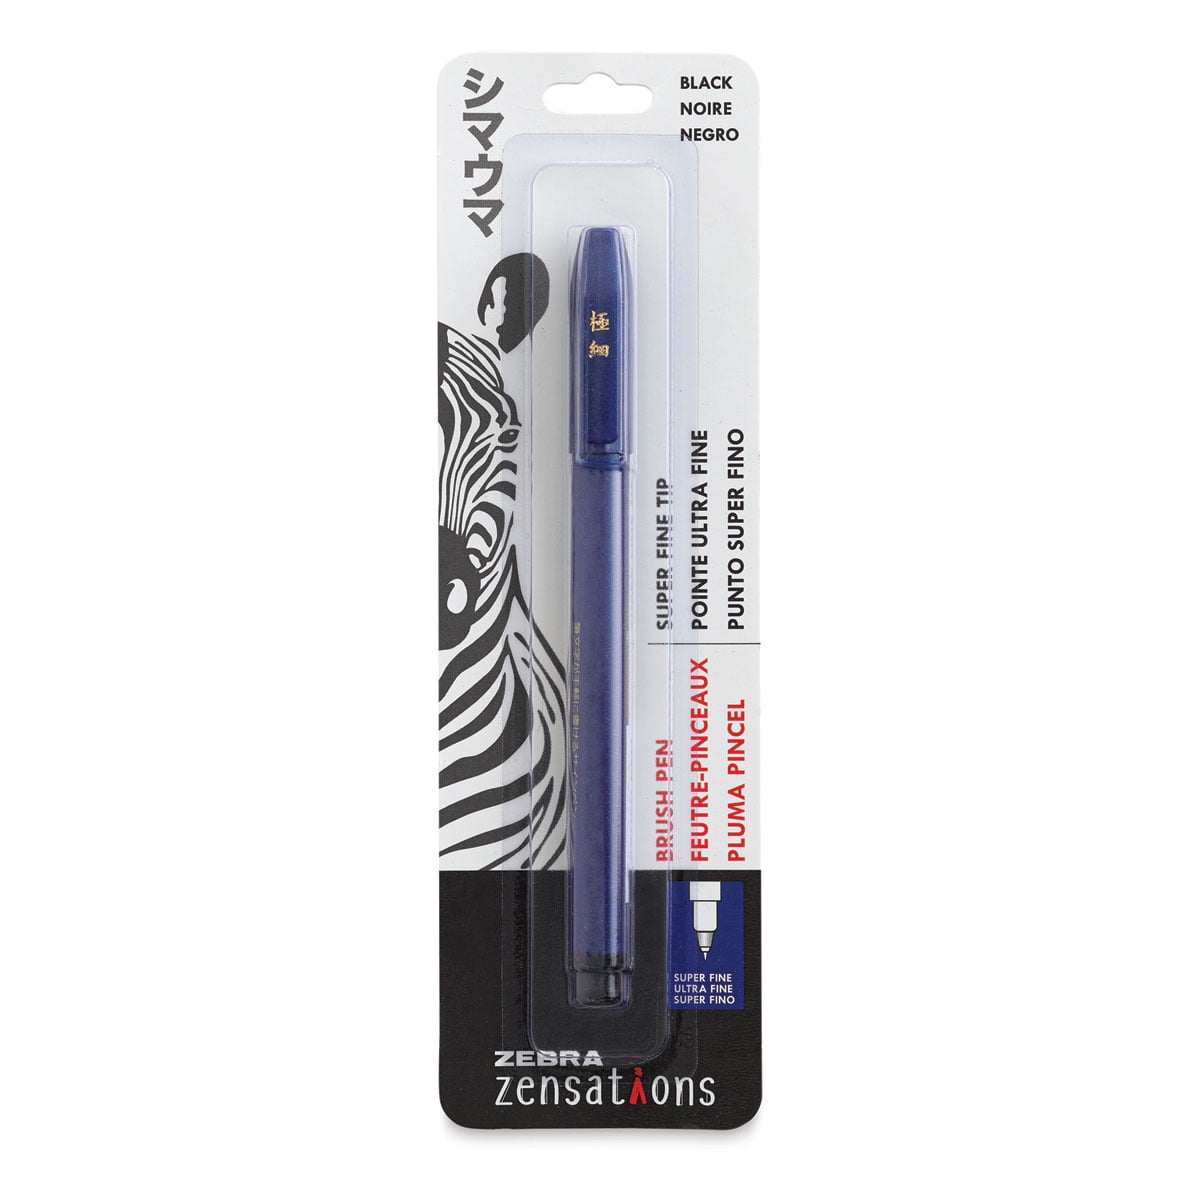 Zebra Besties Lettering Brush and Marker Exclusive 16 Piece Set, Includes 1 Each Black Brush Pen in Extra Fine, Fine and Medium Tips, 3 Metallic